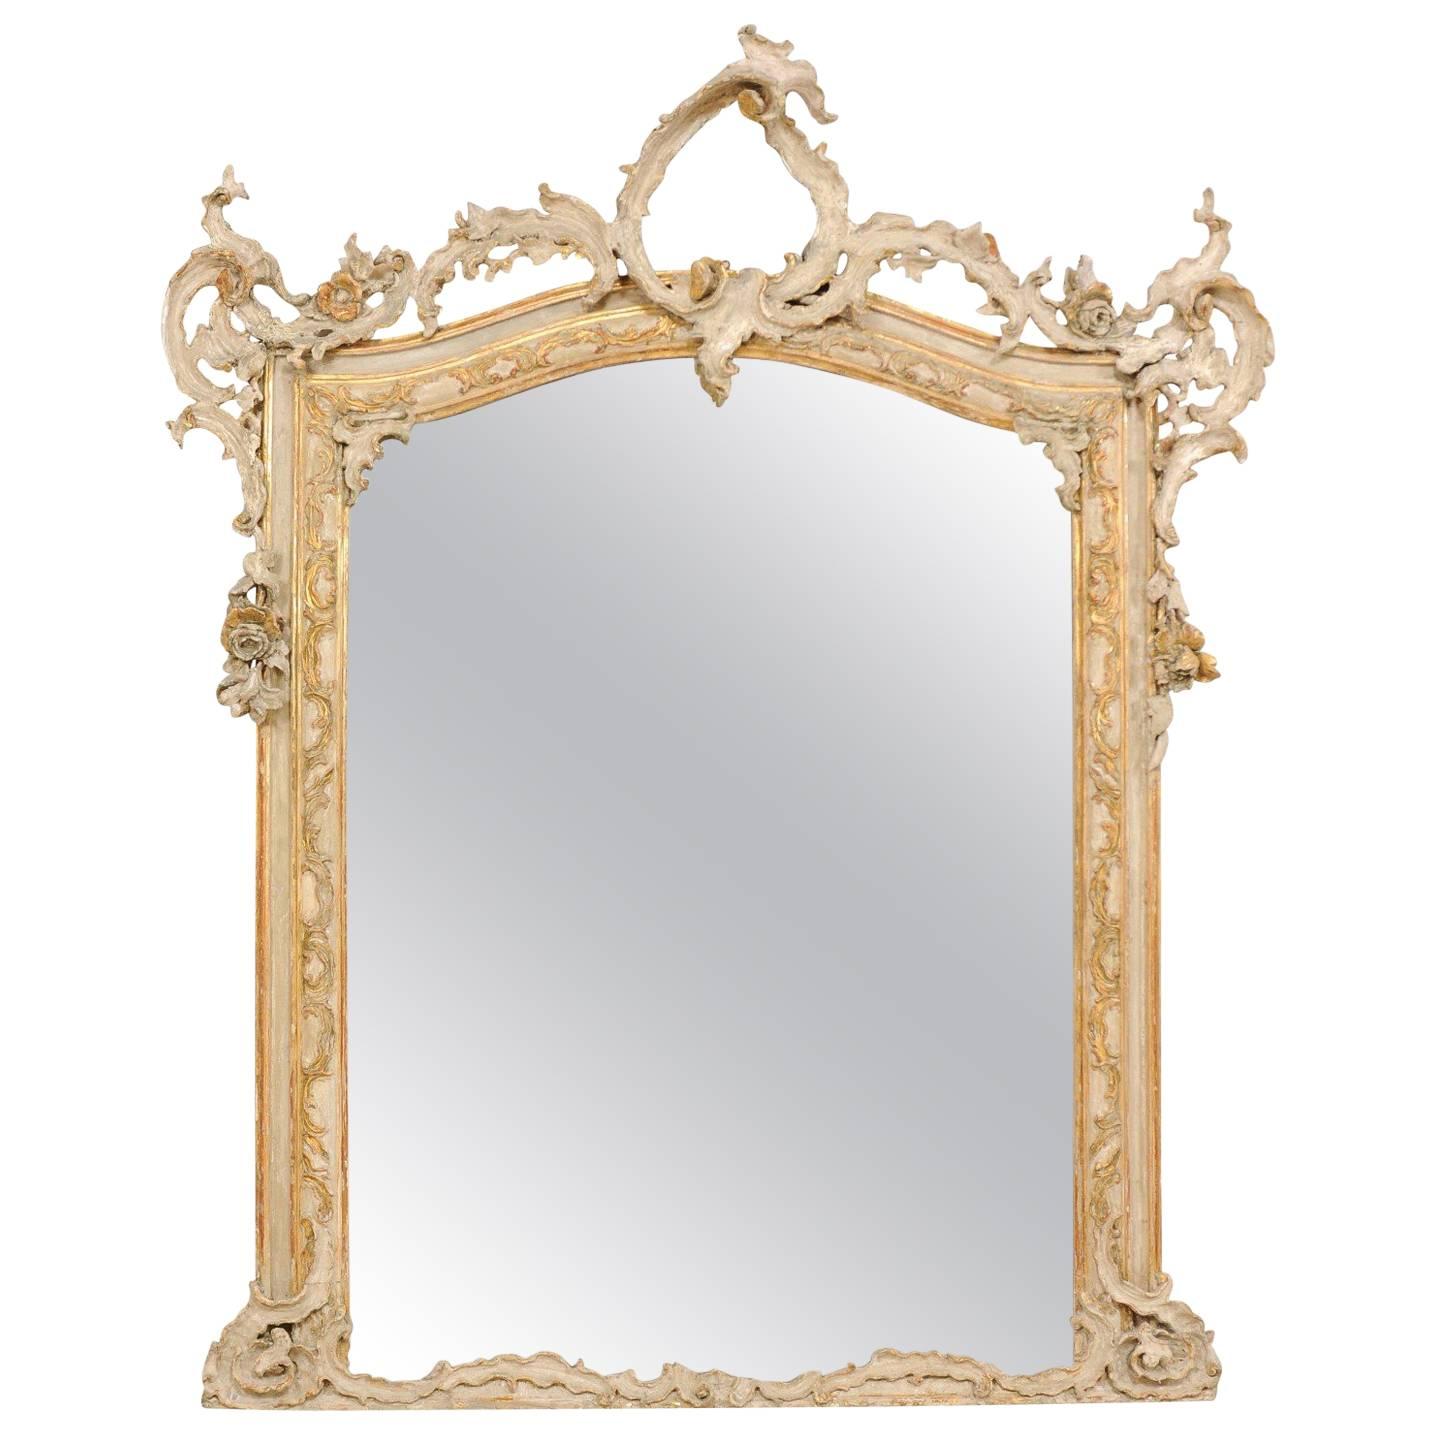 Early 19th Century Italian Baroque Style Grand Scale Mirror with Carved Foliage